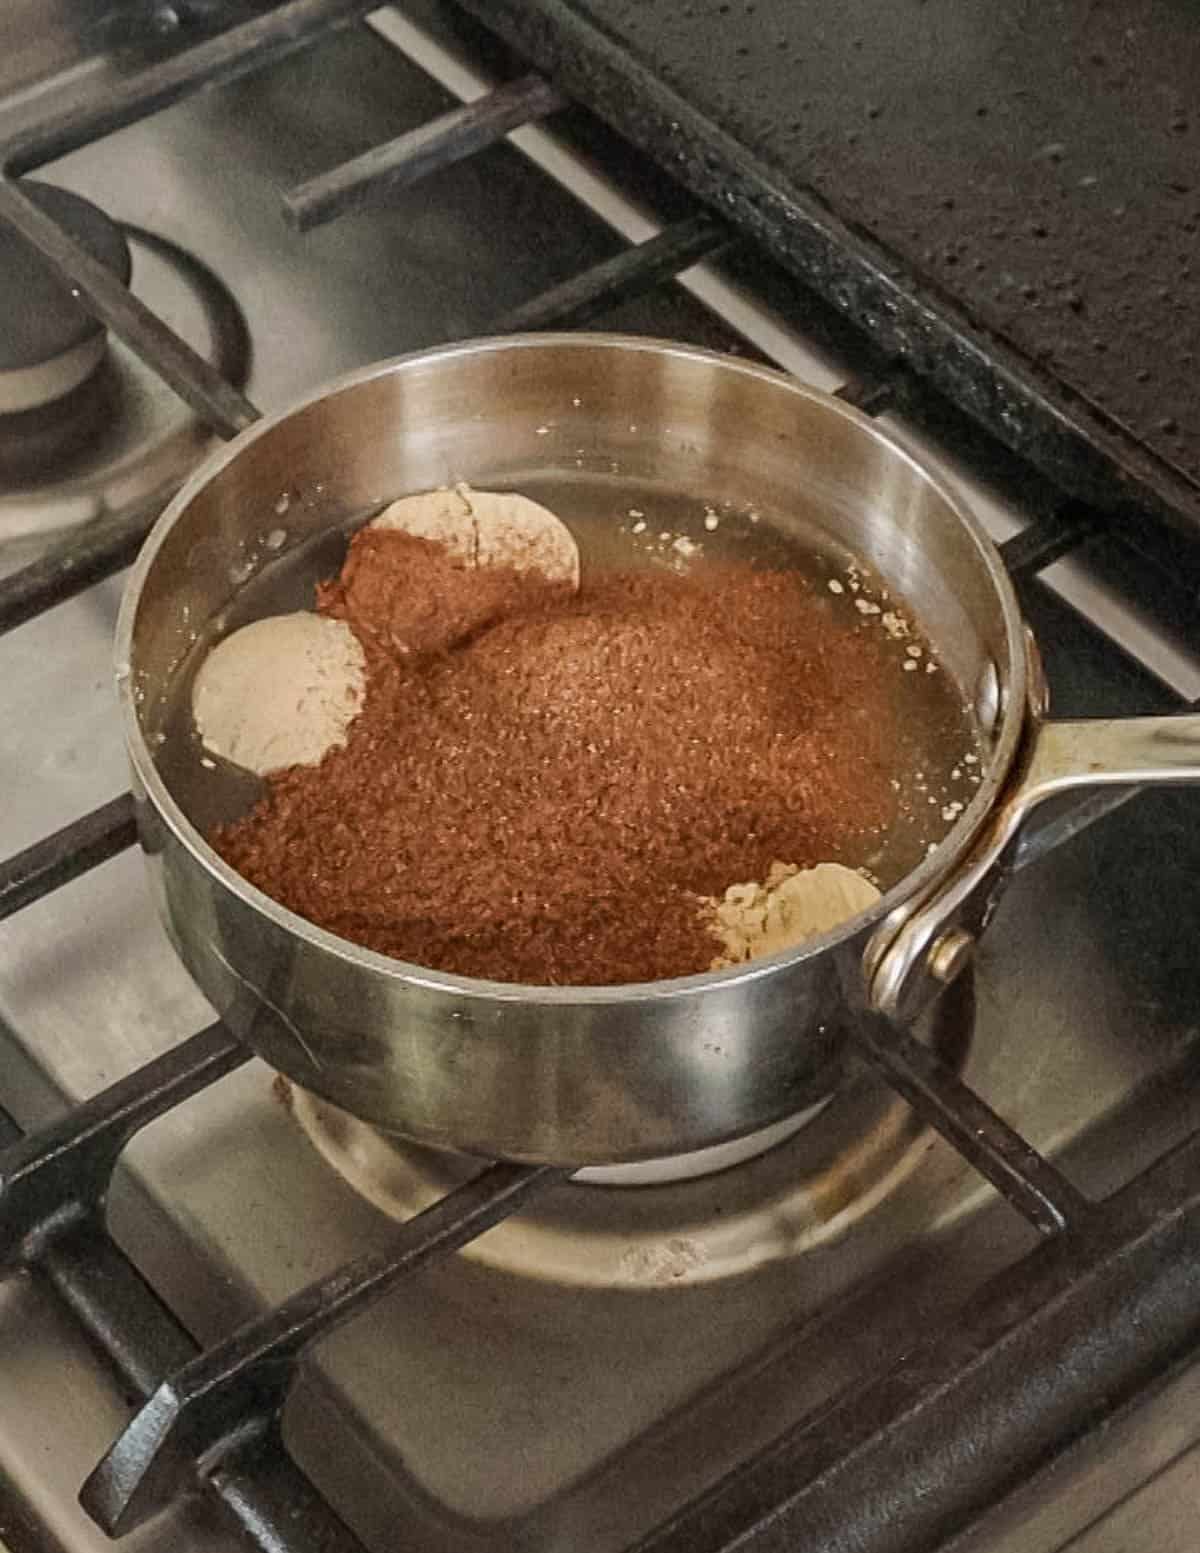 Cooking dock flour and acorn starch. 